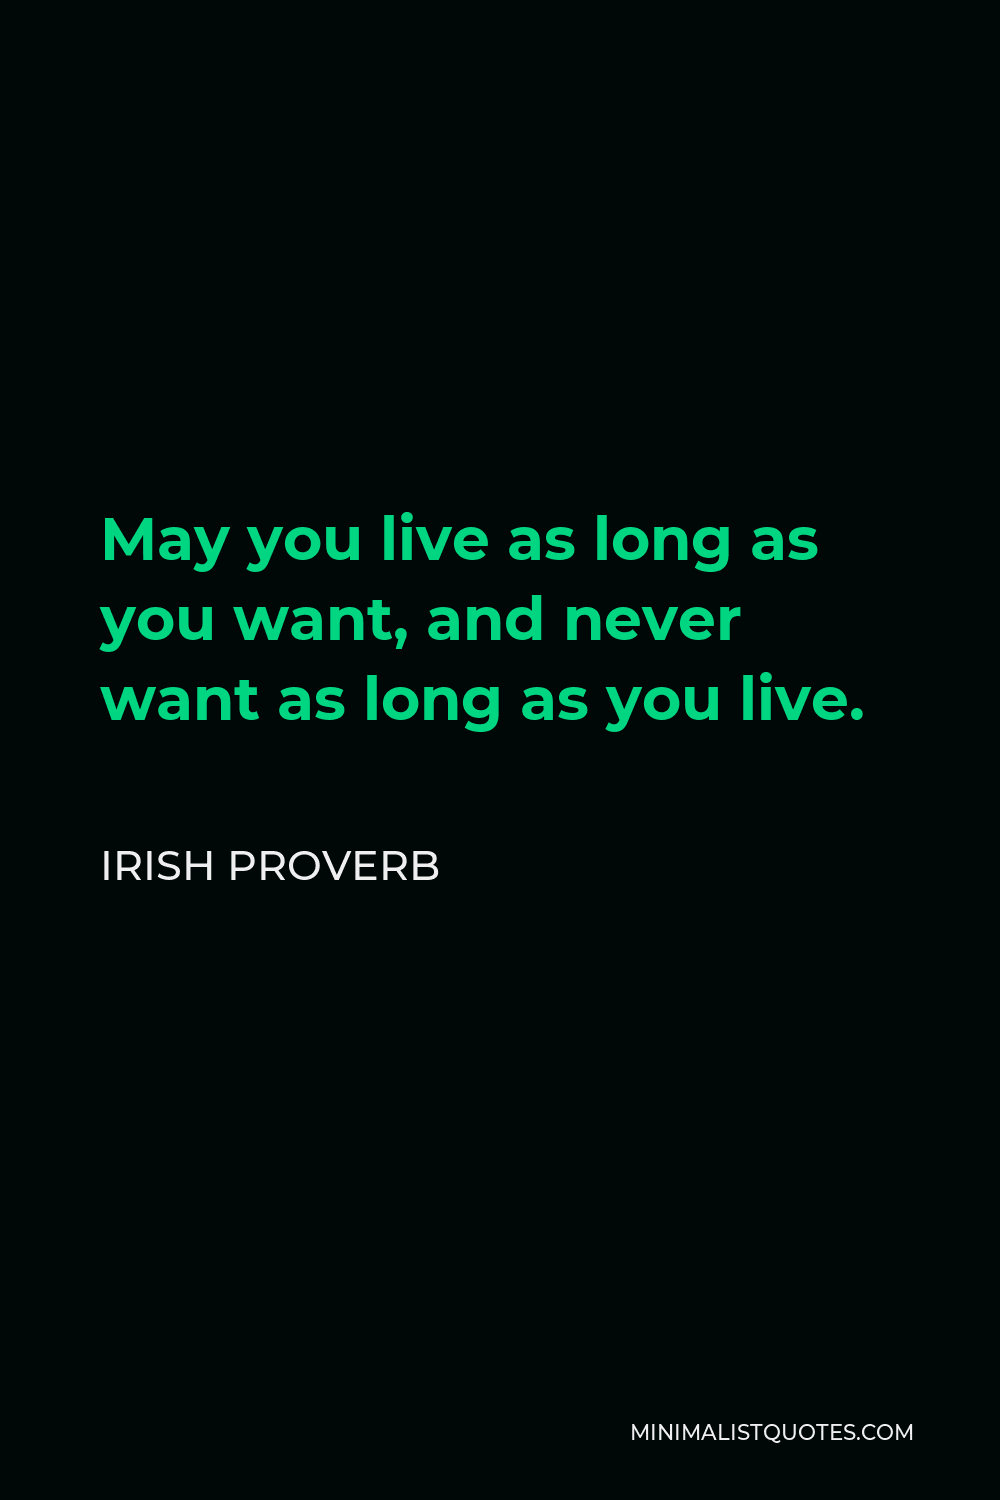 Irish Proverb Quote - May you live as long as you want, and never want as long as you live.